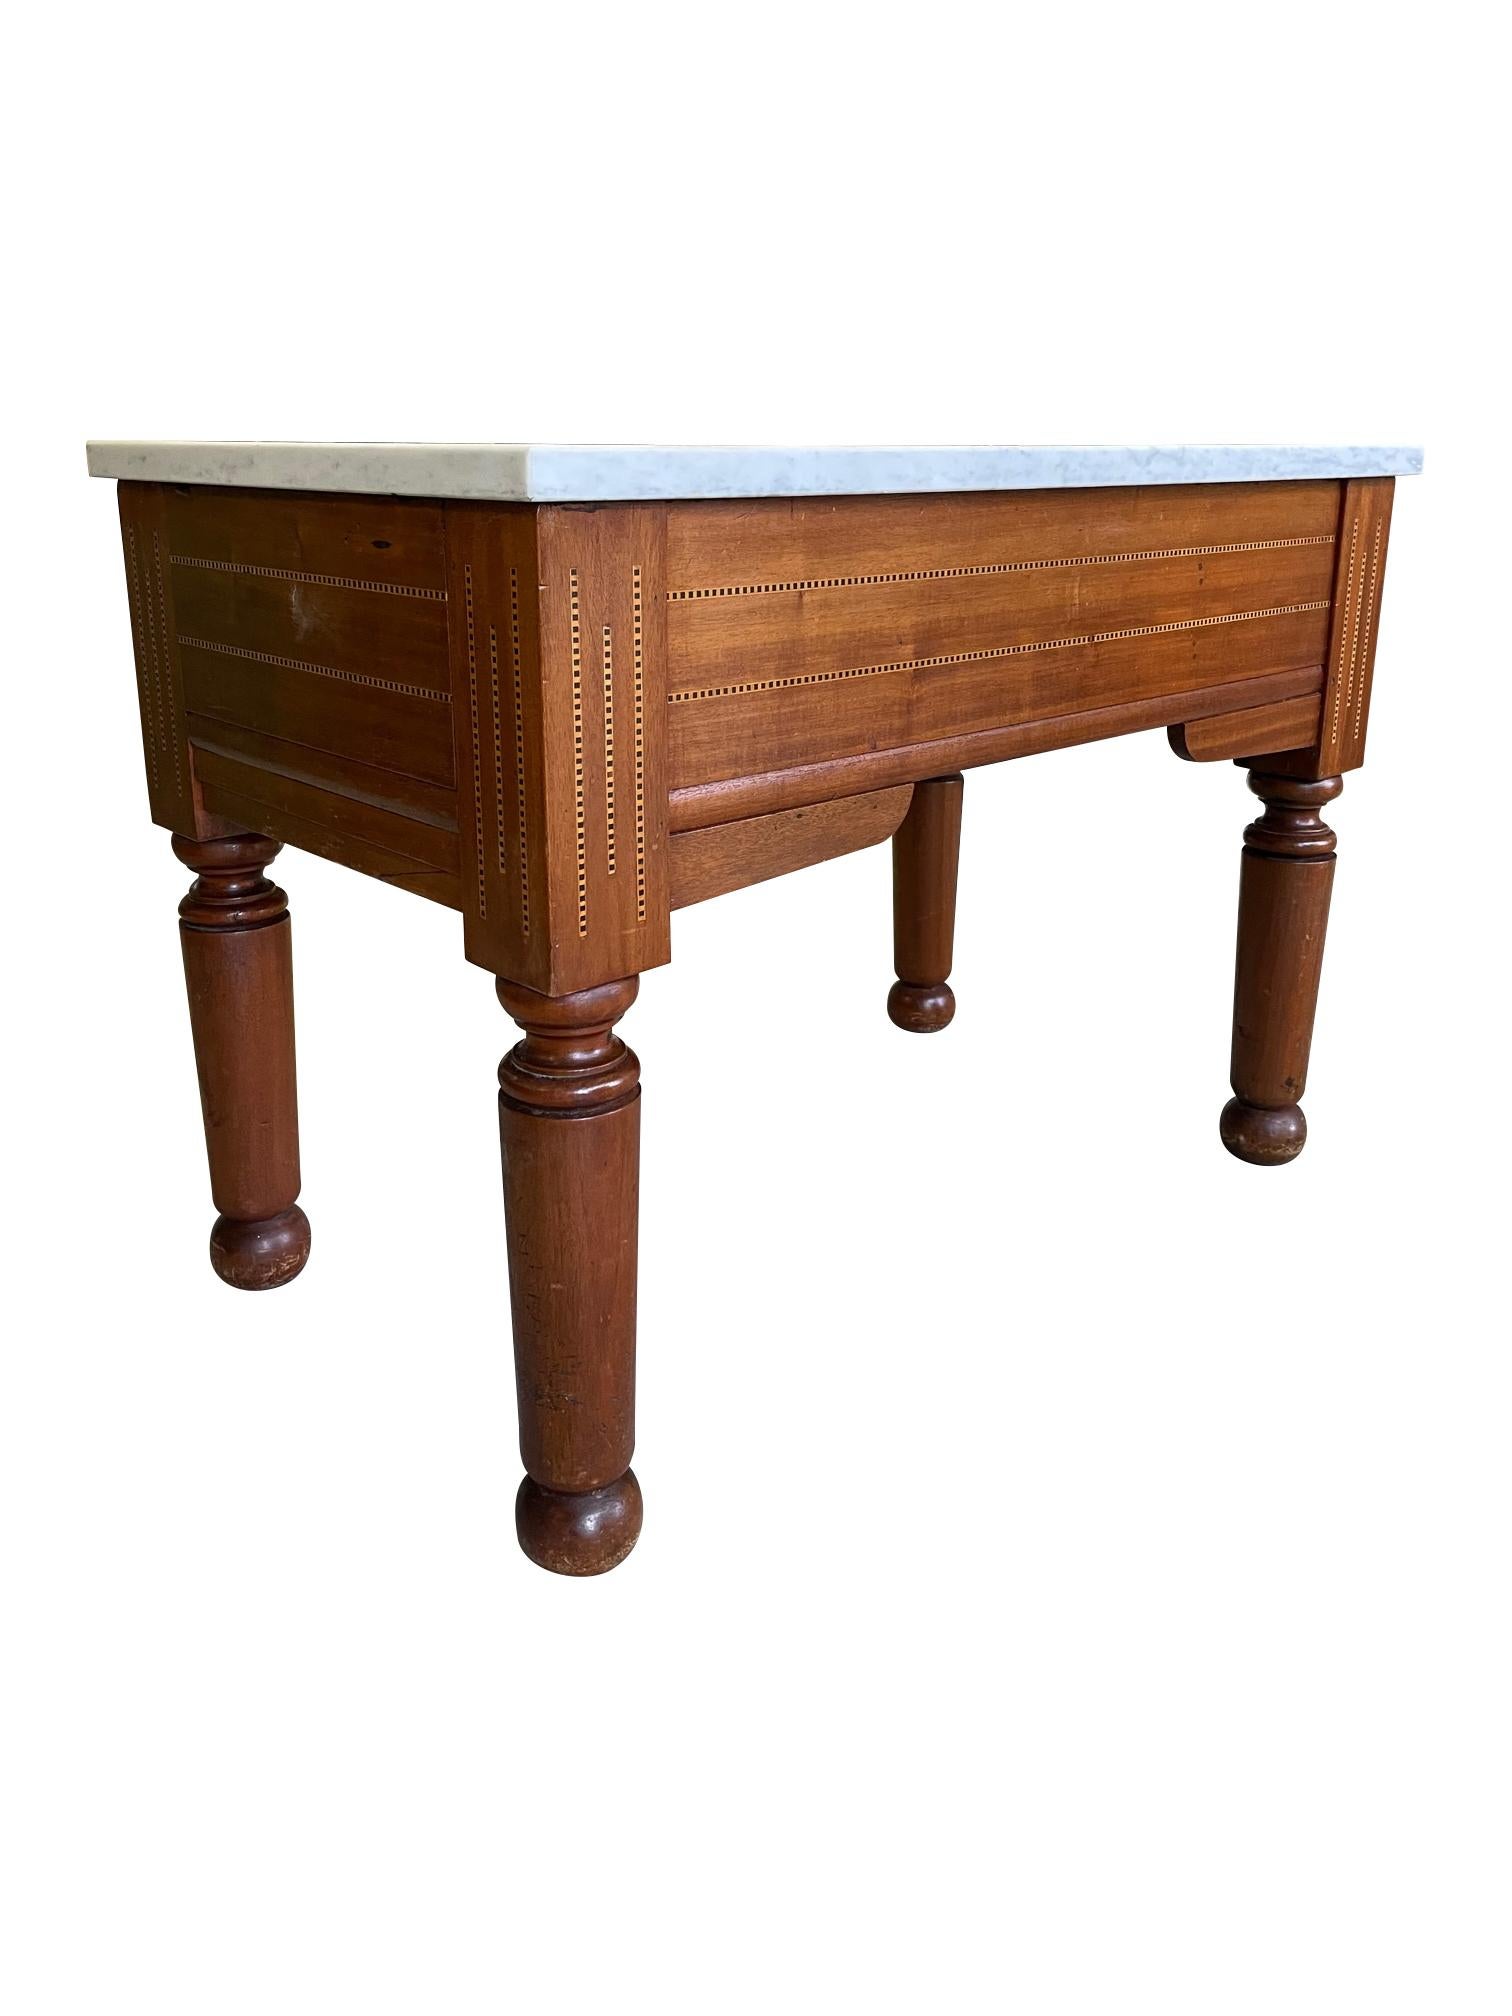 A French Pastry / Chocolatier table with white marble top, lovely Art Deco feel to the design of the table, with lovely inlay details to the front and both sides of the table

Height 76cm / 29.9”

Width 107cm / 42.1”

Depth 62cm / 24.4”